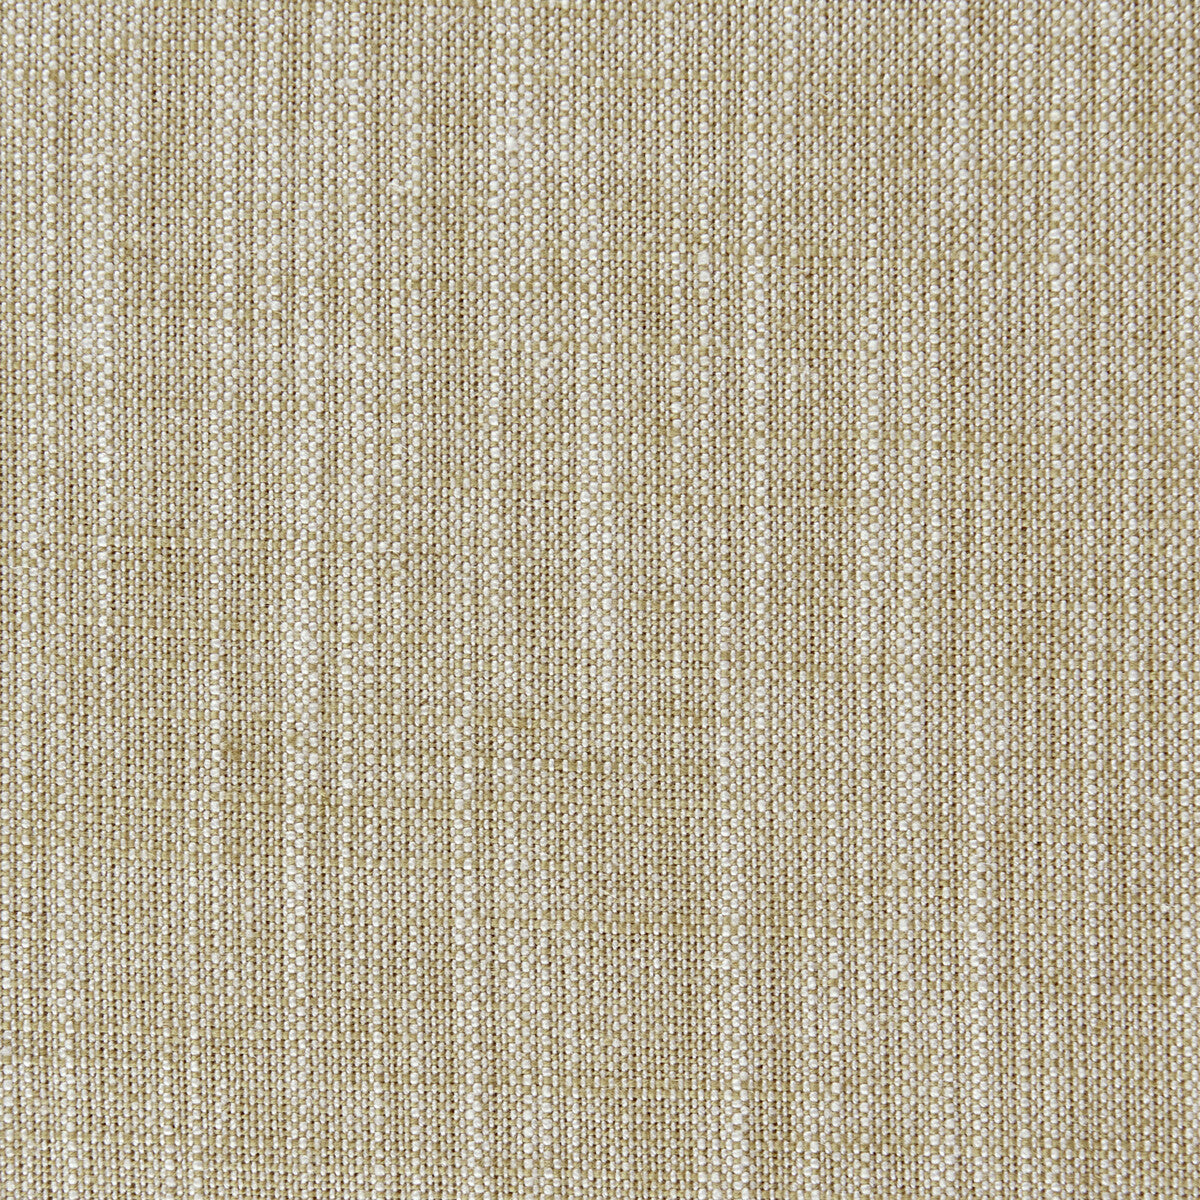 Biarritz fabric in bamboo color - pattern F0965/04.CAC.0 - by Clarke And Clarke in the Clarke &amp; Clarke Biarritz collection